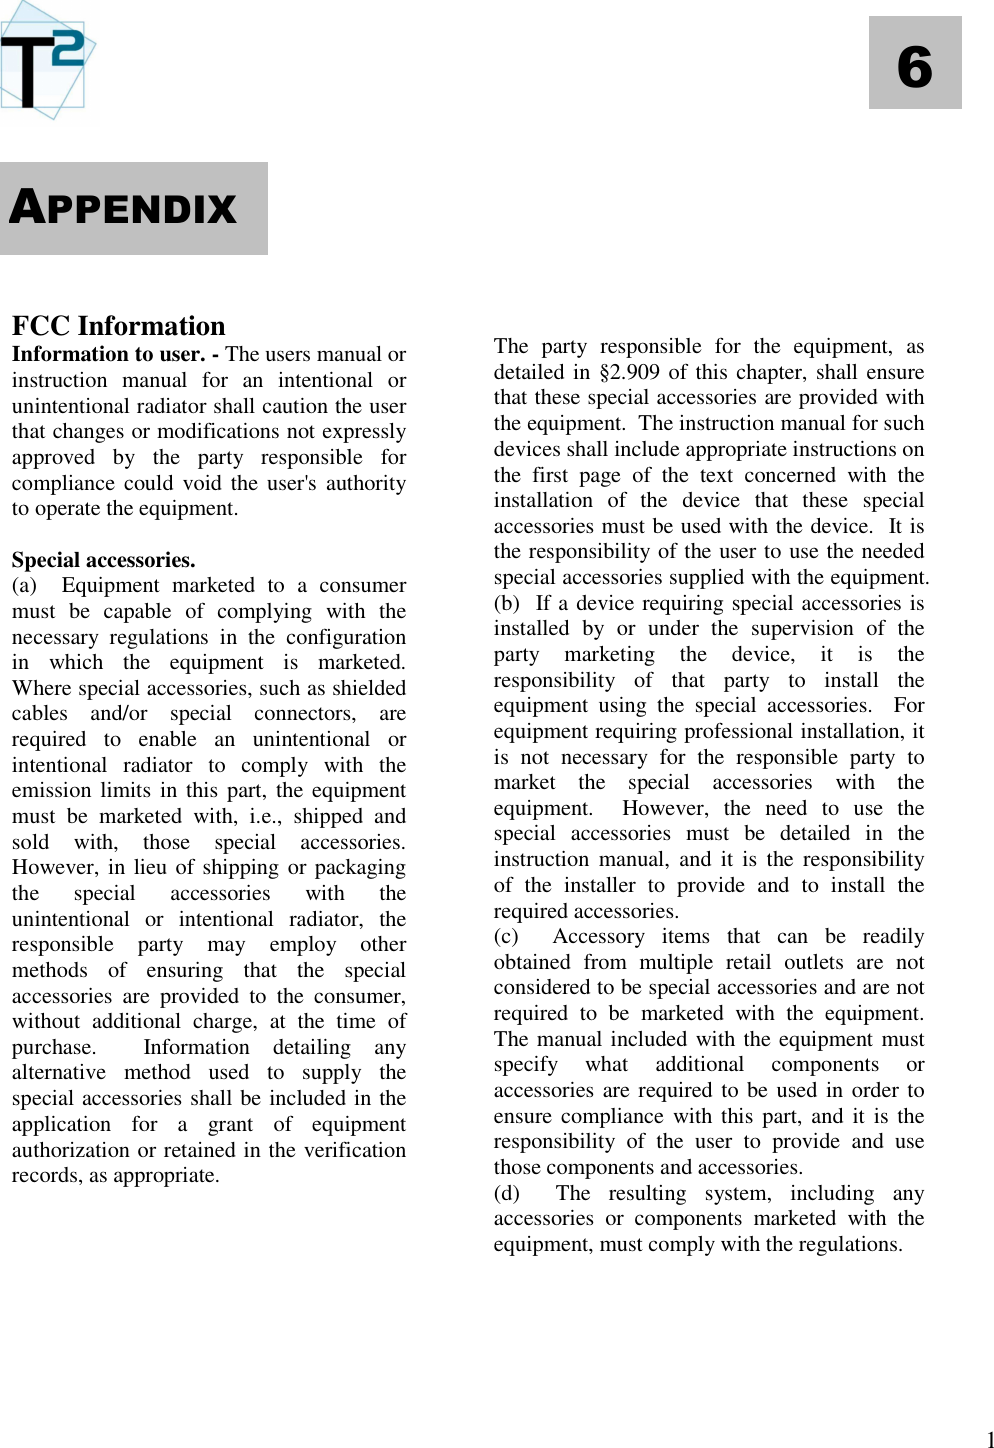   1 6       FCC Information Information to user. - The users manual or instruction  manual  for  an  intentional  or unintentional radiator shall caution the user that changes or modifications not expressly approved  by  the  party  responsible  for compliance could void  the  user&apos;s  authority to operate the equipment.  Special accessories.  (a)    Equipment  marketed  to  a  consumer must  be  capable  of  complying  with  the necessary  regulations  in  the  configuration in  which  the  equipment  is  marketed.  Where special accessories, such as shielded cables  and/or  special  connectors,  are required  to  enable  an  unintentional  or intentional  radiator  to  comply  with  the emission limits in this part, the equipment must  be  marketed  with,  i.e.,  shipped  and sold  with,  those  special  accessories.  However, in lieu of shipping or packaging the  special  accessories  with  the unintentional  or  intentional  radiator,  the responsible  party  may  employ  other methods  of  ensuring  that  the  special accessories  are  provided  to  the  consumer, without  additional  charge,  at  the  time  of purchase.    Information  detailing  any alternative  method  used  to  supply  the special accessories shall be included in the application  for  a  grant  of  equipment  authorization or retained in the verification records, as appropriate.                  The  party  responsible  for  the  equipment,  as detailed in §2.909 of this chapter, shall ensure that these special accessories are provided with the equipment.  The instruction manual for such devices shall include appropriate instructions on the  first  page  of  the  text  concerned  with  the installation  of  the  device  that  these  special accessories must be used with the device.  It is the responsibility of the user to use the needed special accessories supplied with the equipment. (b)  If a device requiring special accessories is installed  by  or  under  the  supervision  of  the party  marketing  the  device,  it  is  the responsibility  of  that  party  to  install  the equipment  using  the  special  accessories.    For equipment requiring professional installation, it is  not  necessary  for  the  responsible  party  to market  the  special  accessories  with  the equipment.    However,  the  need  to  use  the special  accessories  must  be  detailed  in  the instruction  manual,  and  it  is  the  responsibility of  the  installer  to  provide  and  to  install  the required accessories. (c)    Accessory  items  that  can  be  readily obtained  from  multiple  retail  outlets  are  not considered to be special accessories and are not required  to  be  marketed  with  the  equipment.  The manual included with the equipment must specify  what  additional  components  or accessories are required to be used in order to ensure compliance with this part,  and  it  is the responsibility  of  the  user  to  provide  and  use those components and accessories. (d)    The  resulting  system,  including  any accessories  or  components  marketed  with  the equipment, must comply with the regulations.     APPENDIX 